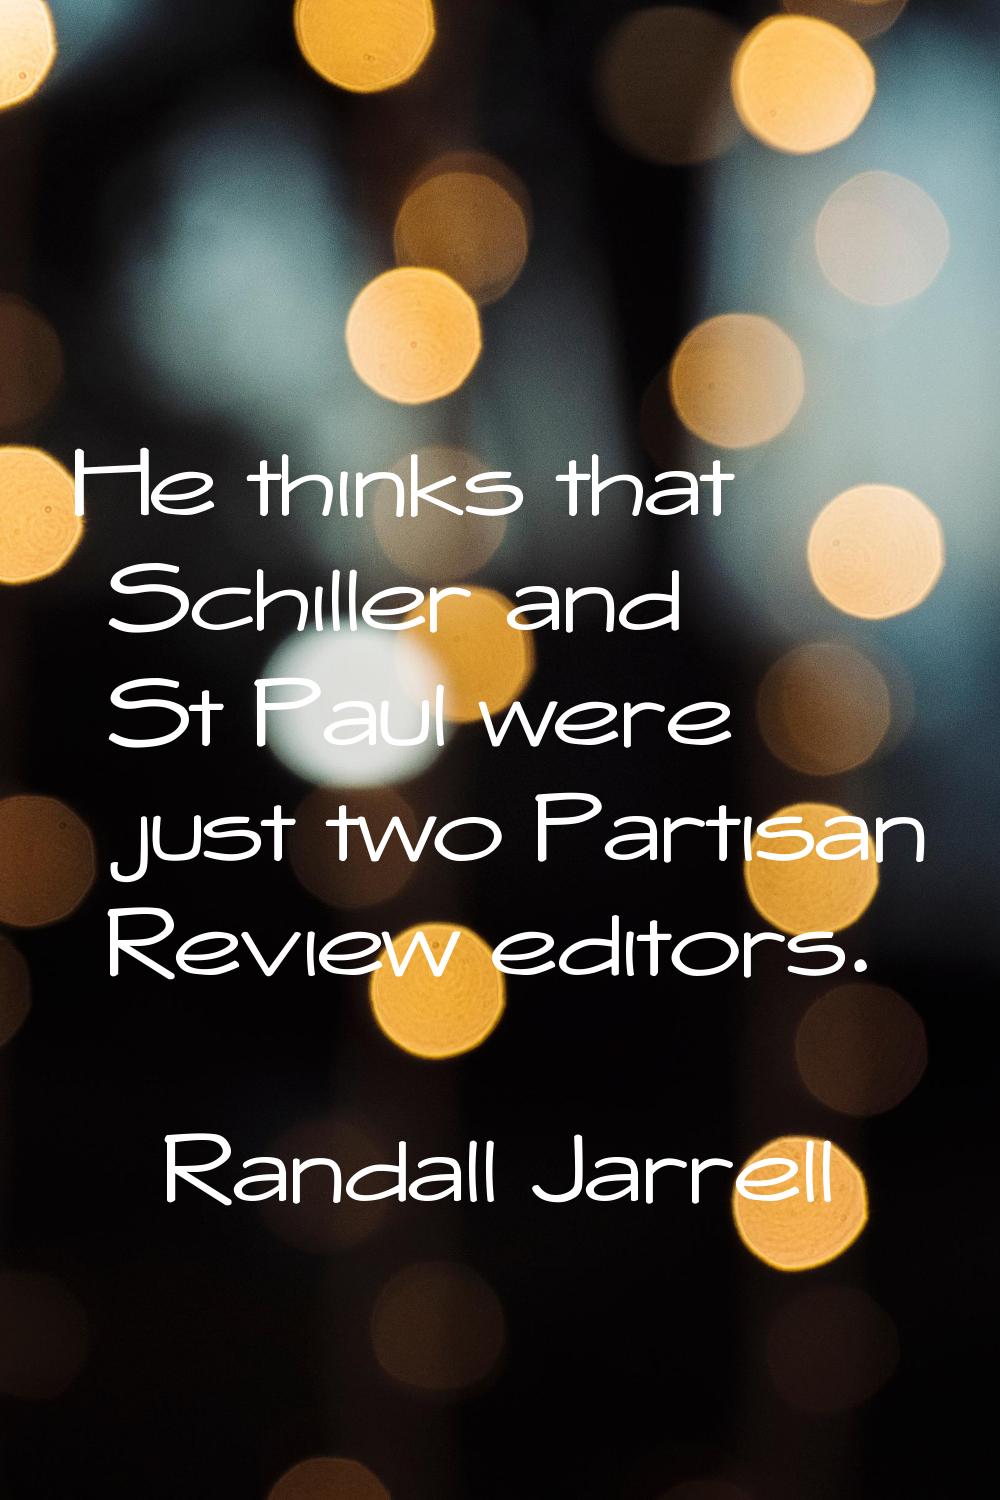 He thinks that Schiller and St Paul were just two Partisan Review editors.